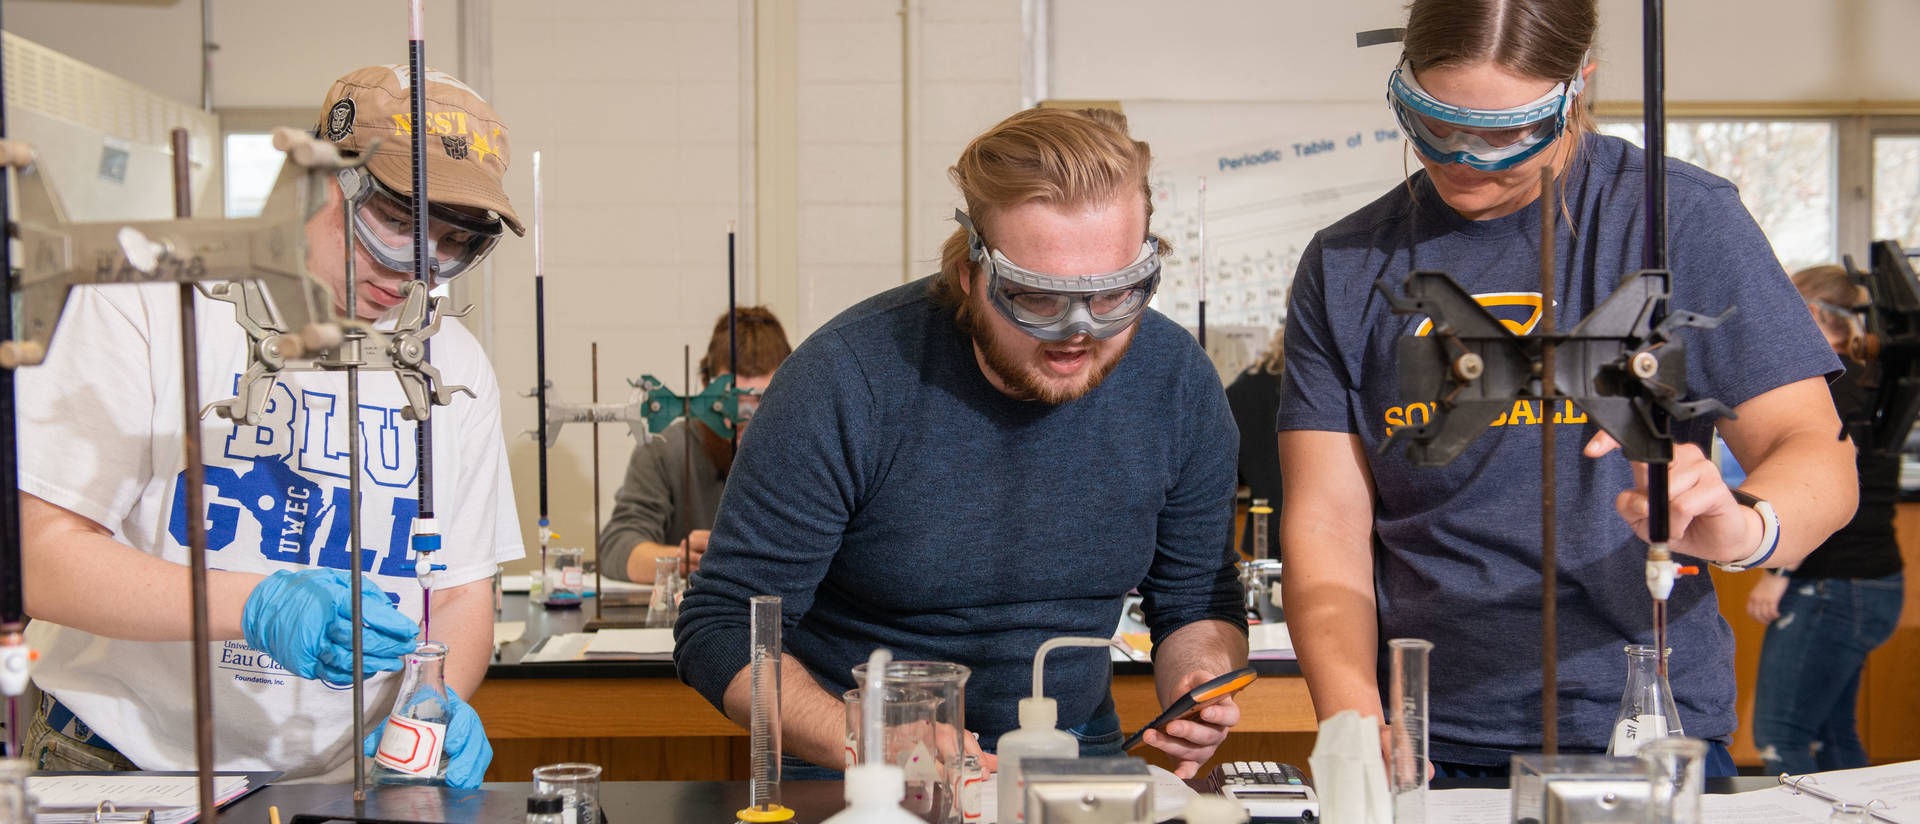 Students in a chemistry lab complete an experiment wearing safety goggles.